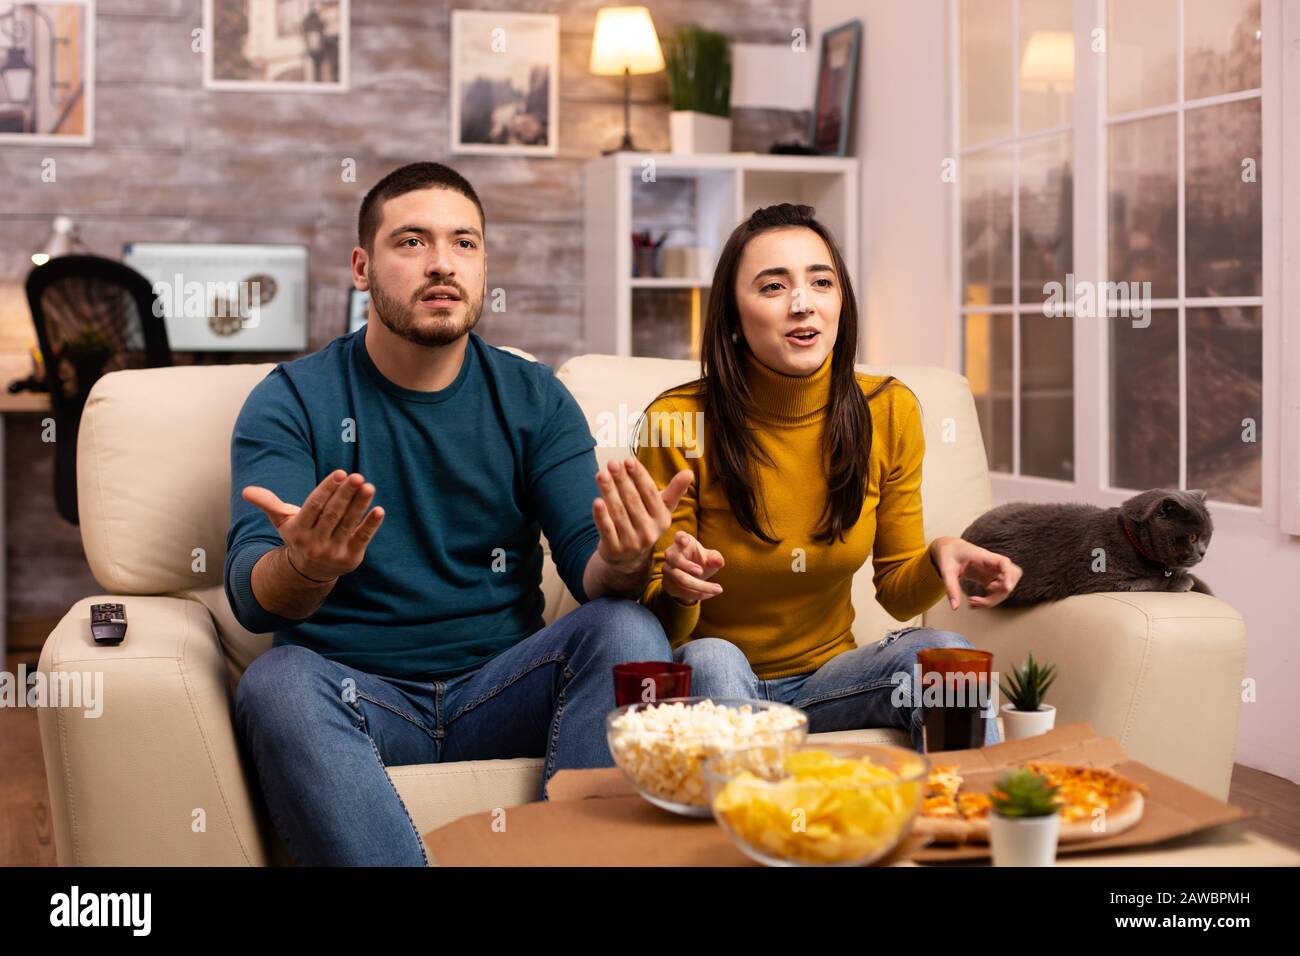 Couple cheering for their favourite team while watching TV and eating fast food Stock Photo